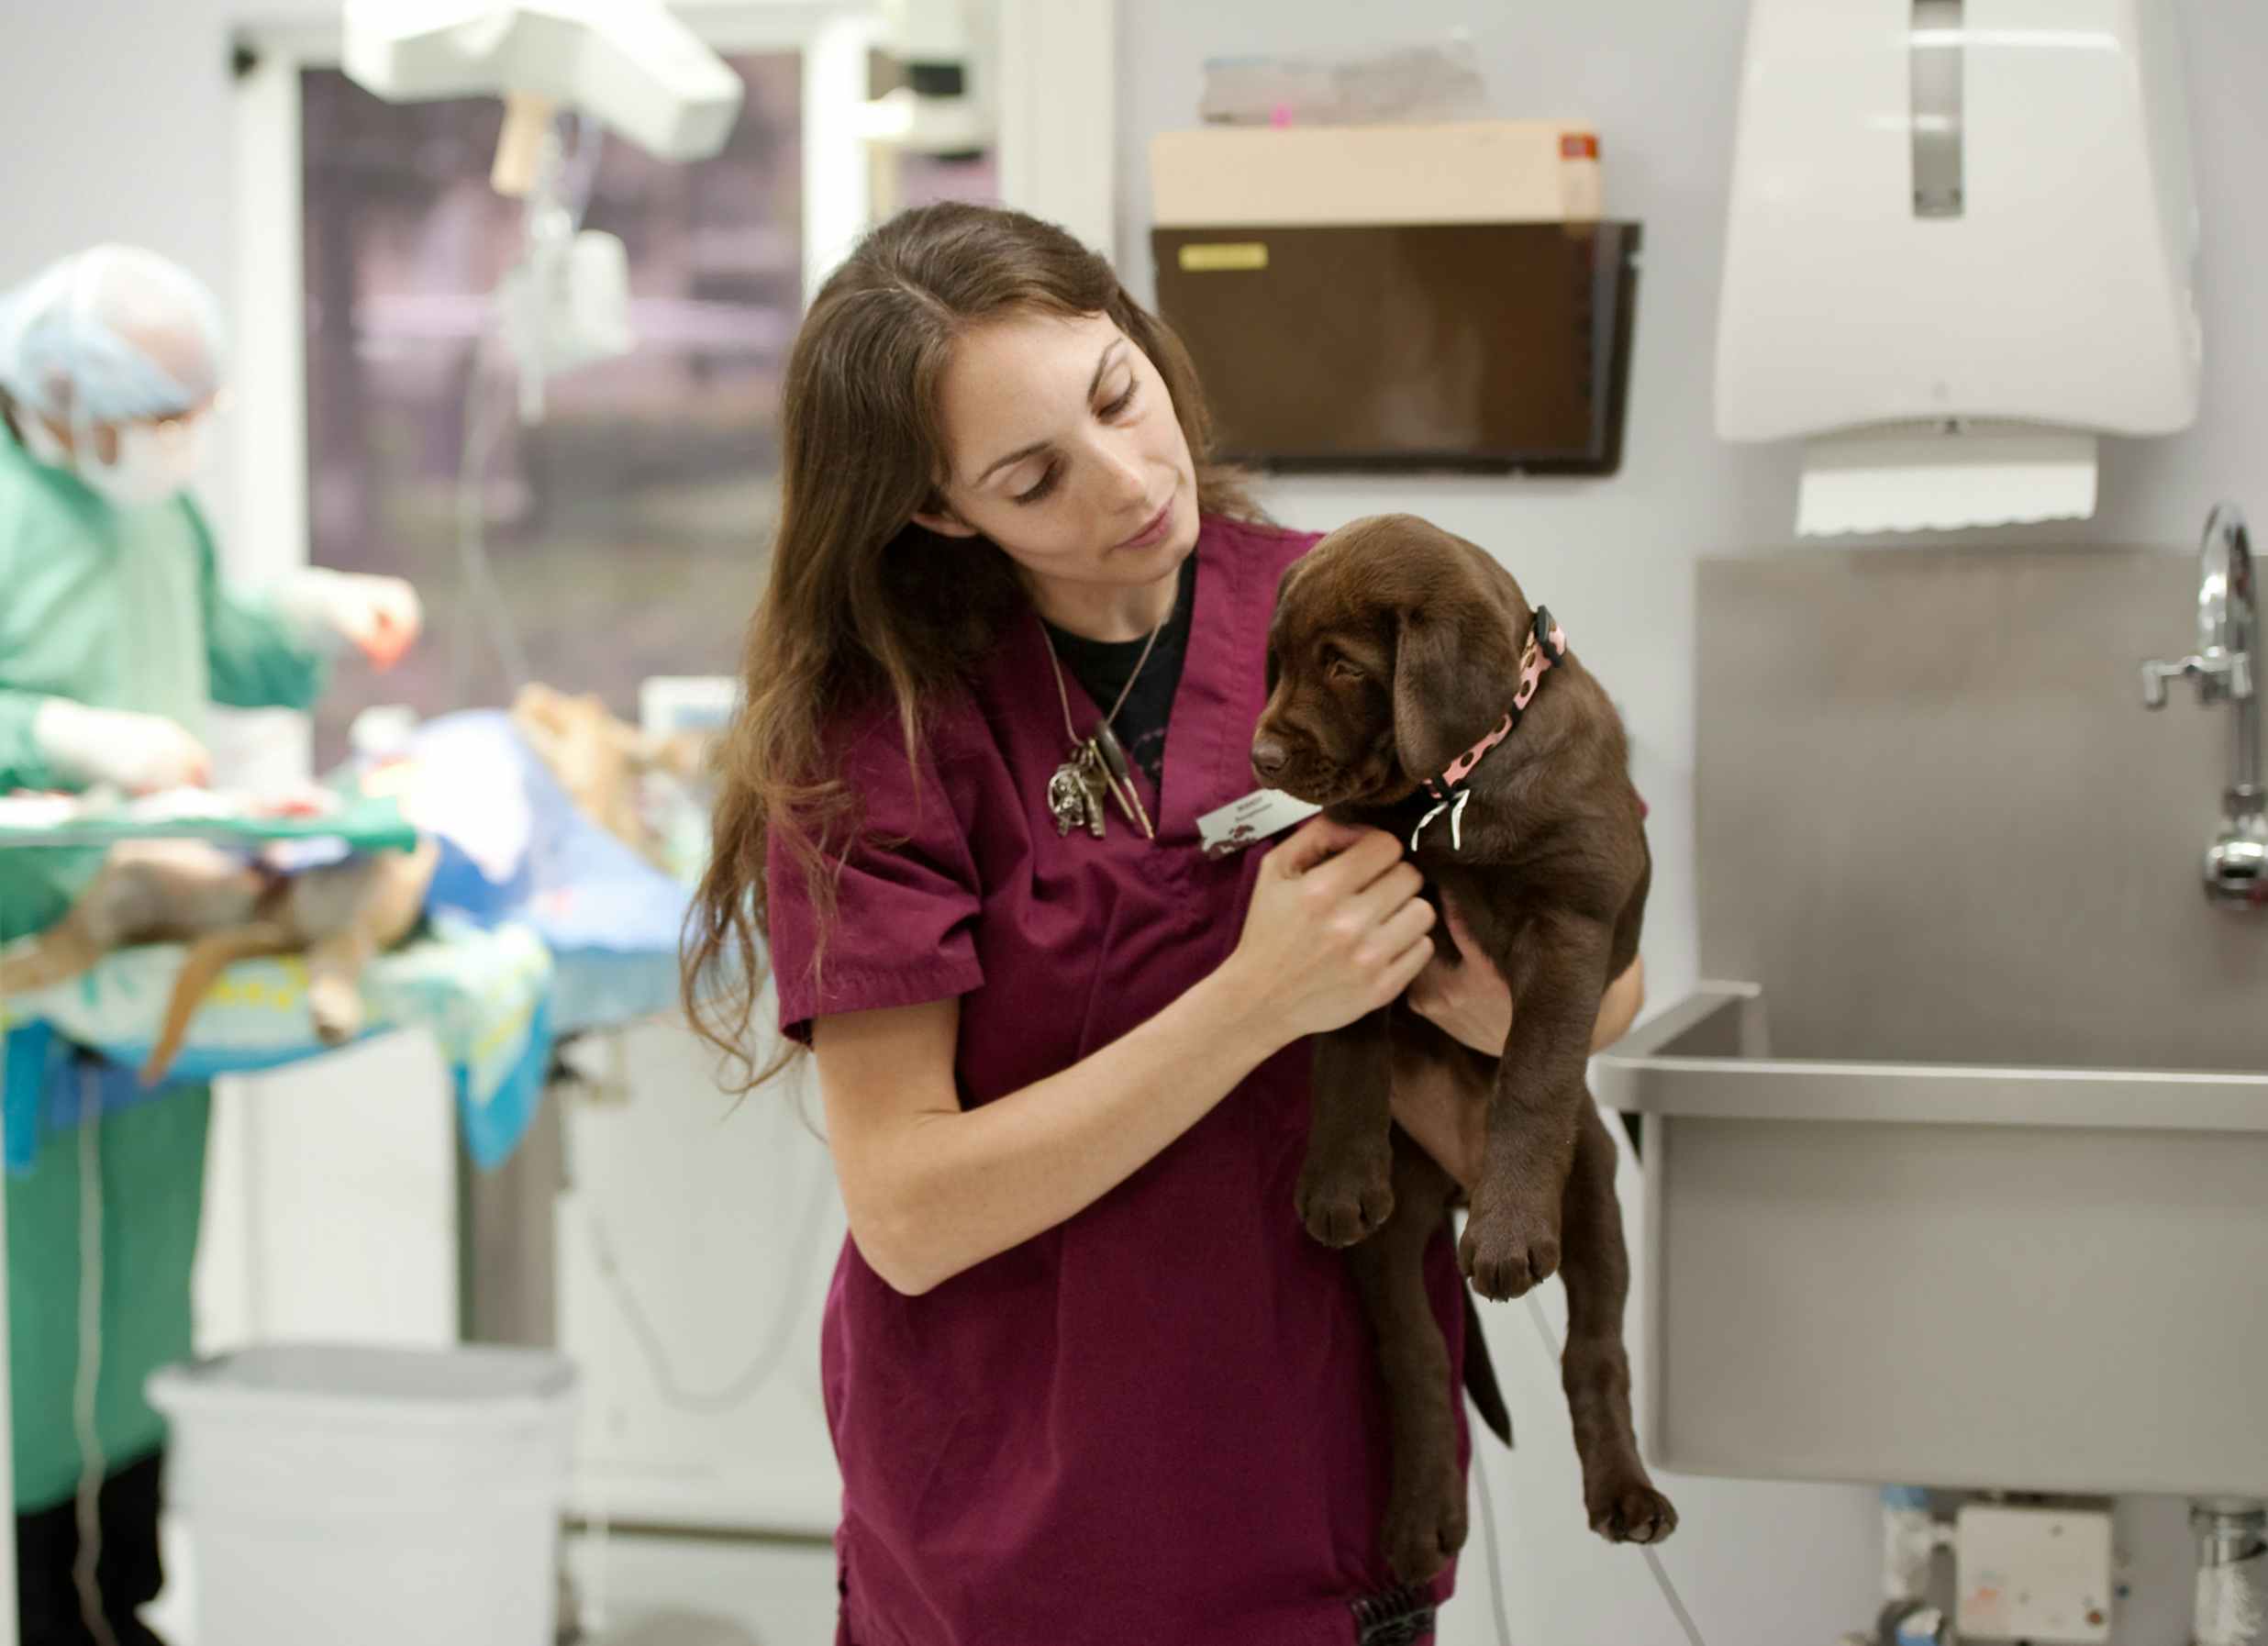 A vet walking through the exam room holding a puppy